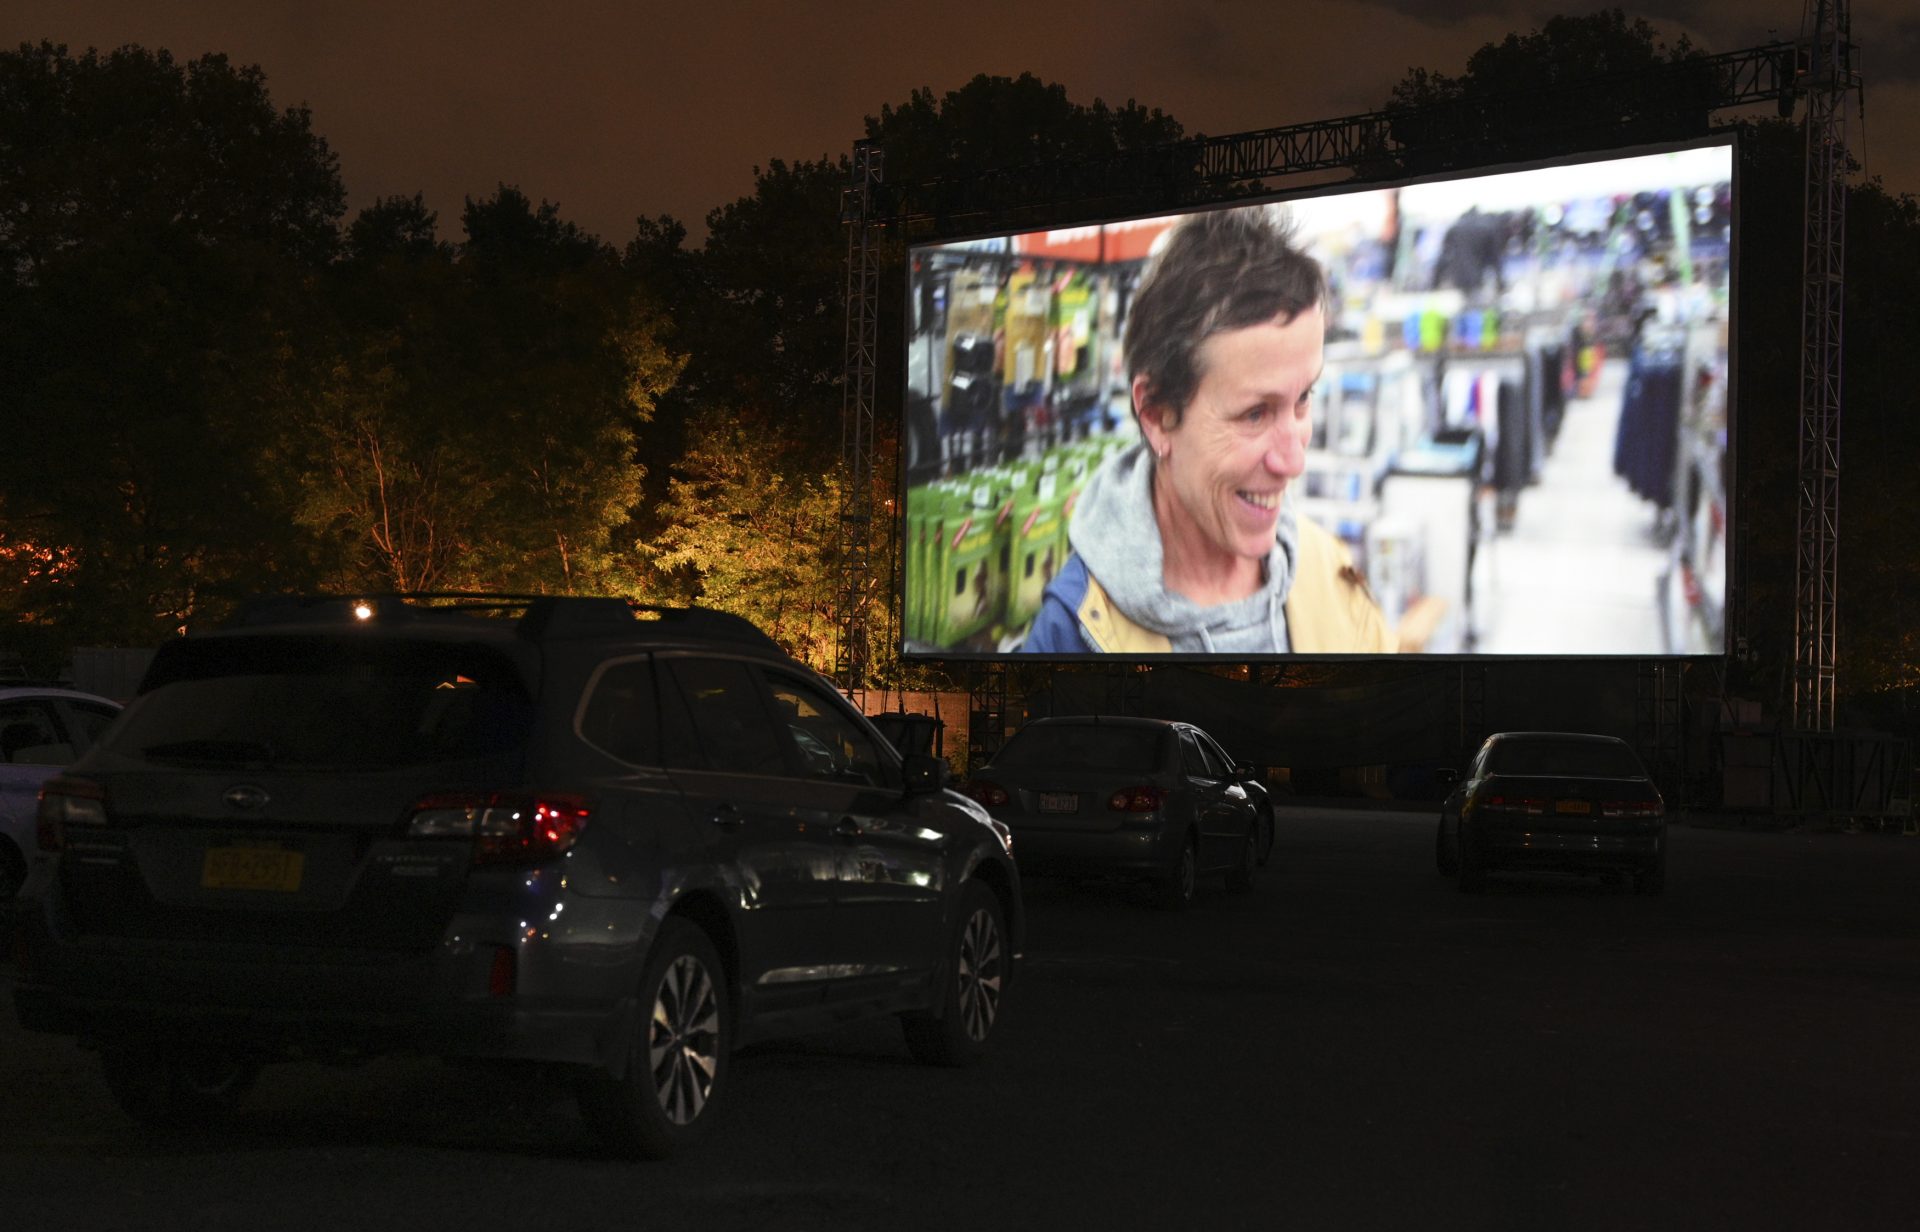 Filmgoers attend the "Nomadland" screening at the Queens Drive-In at the New York Hall of Science during the 58th New York Film Festival on Saturday, Sept. 26, 2020, in New York.